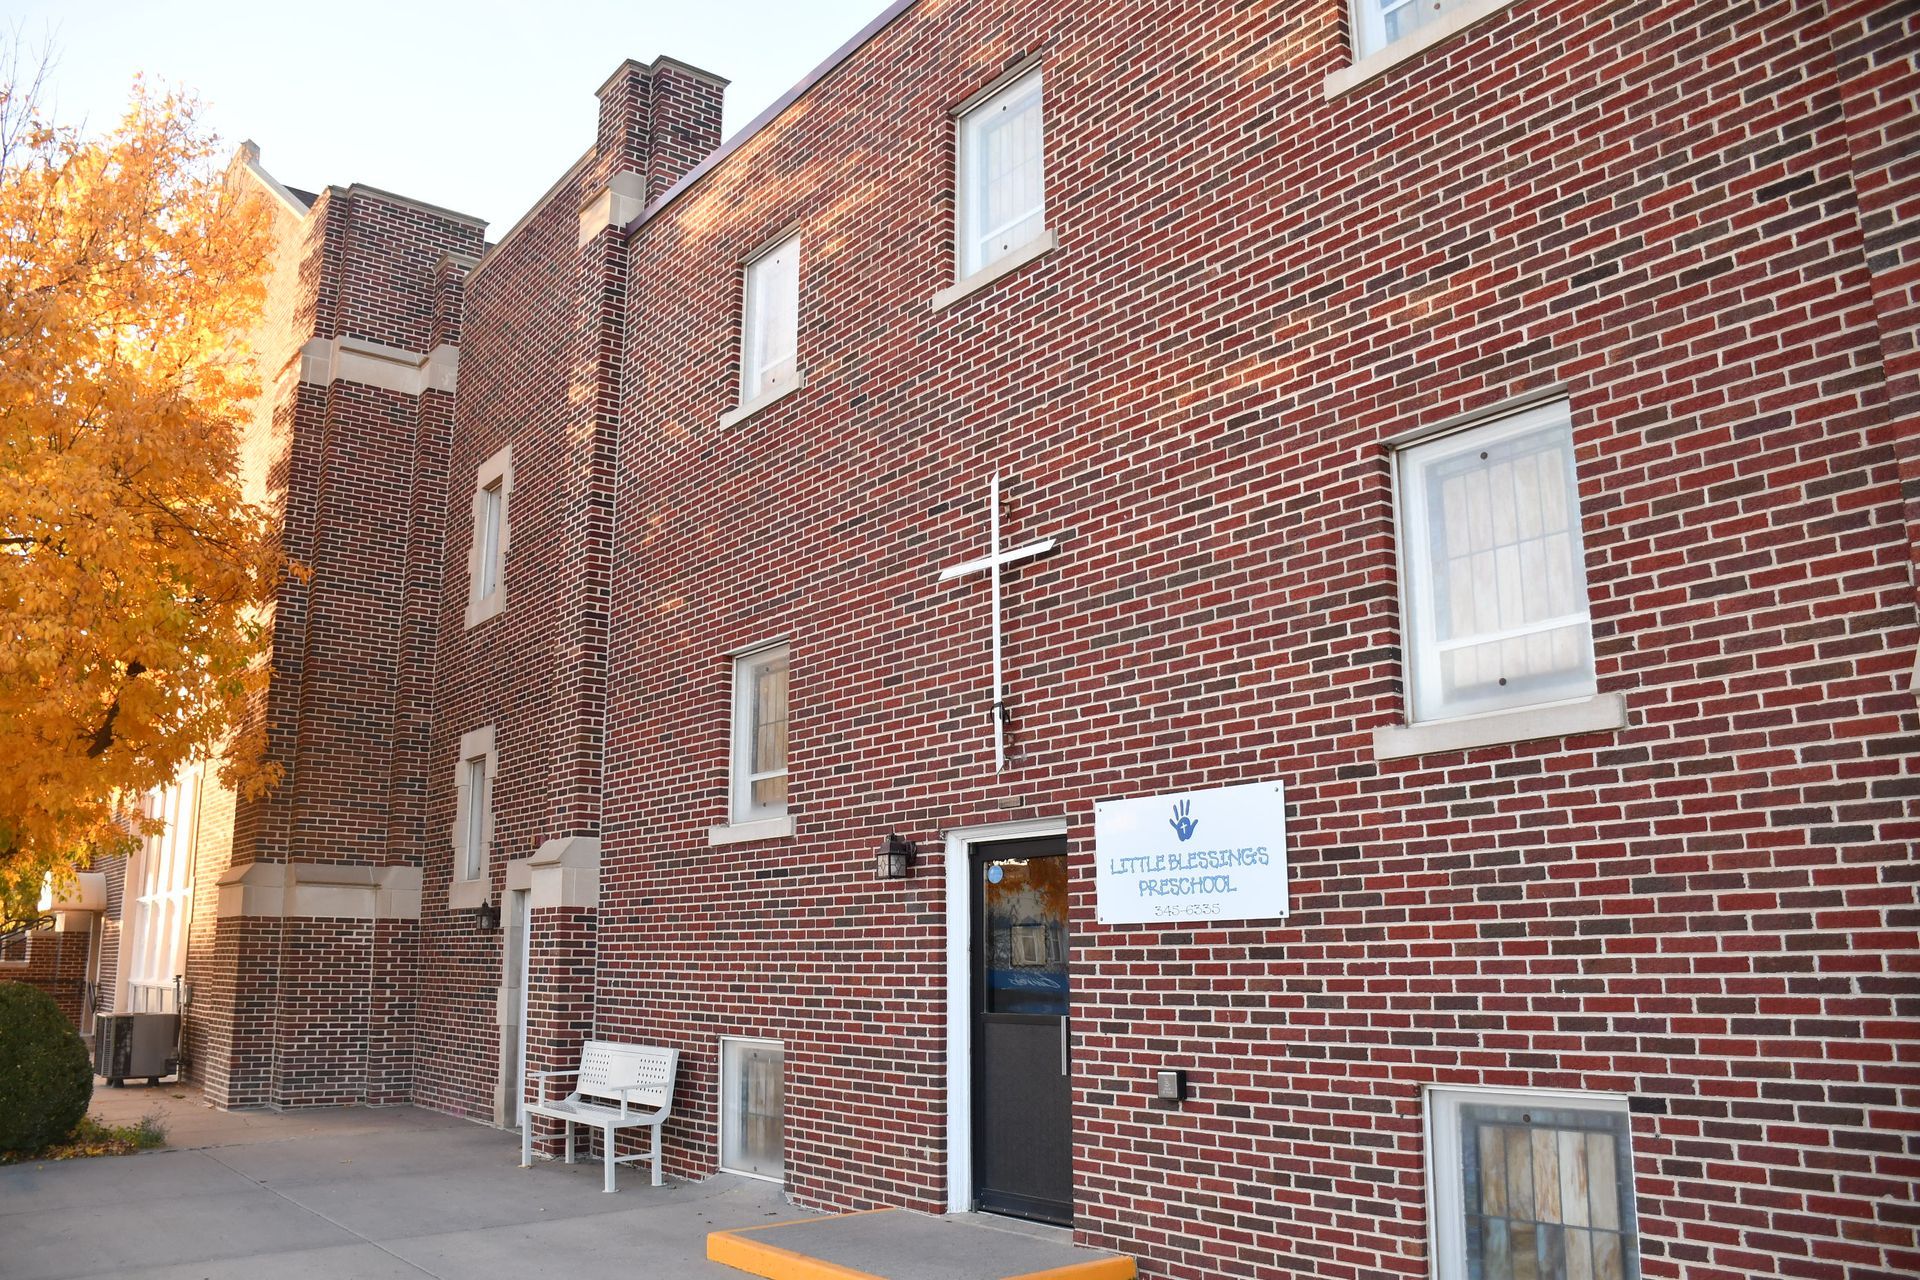 A brick building with a cross on the side of it